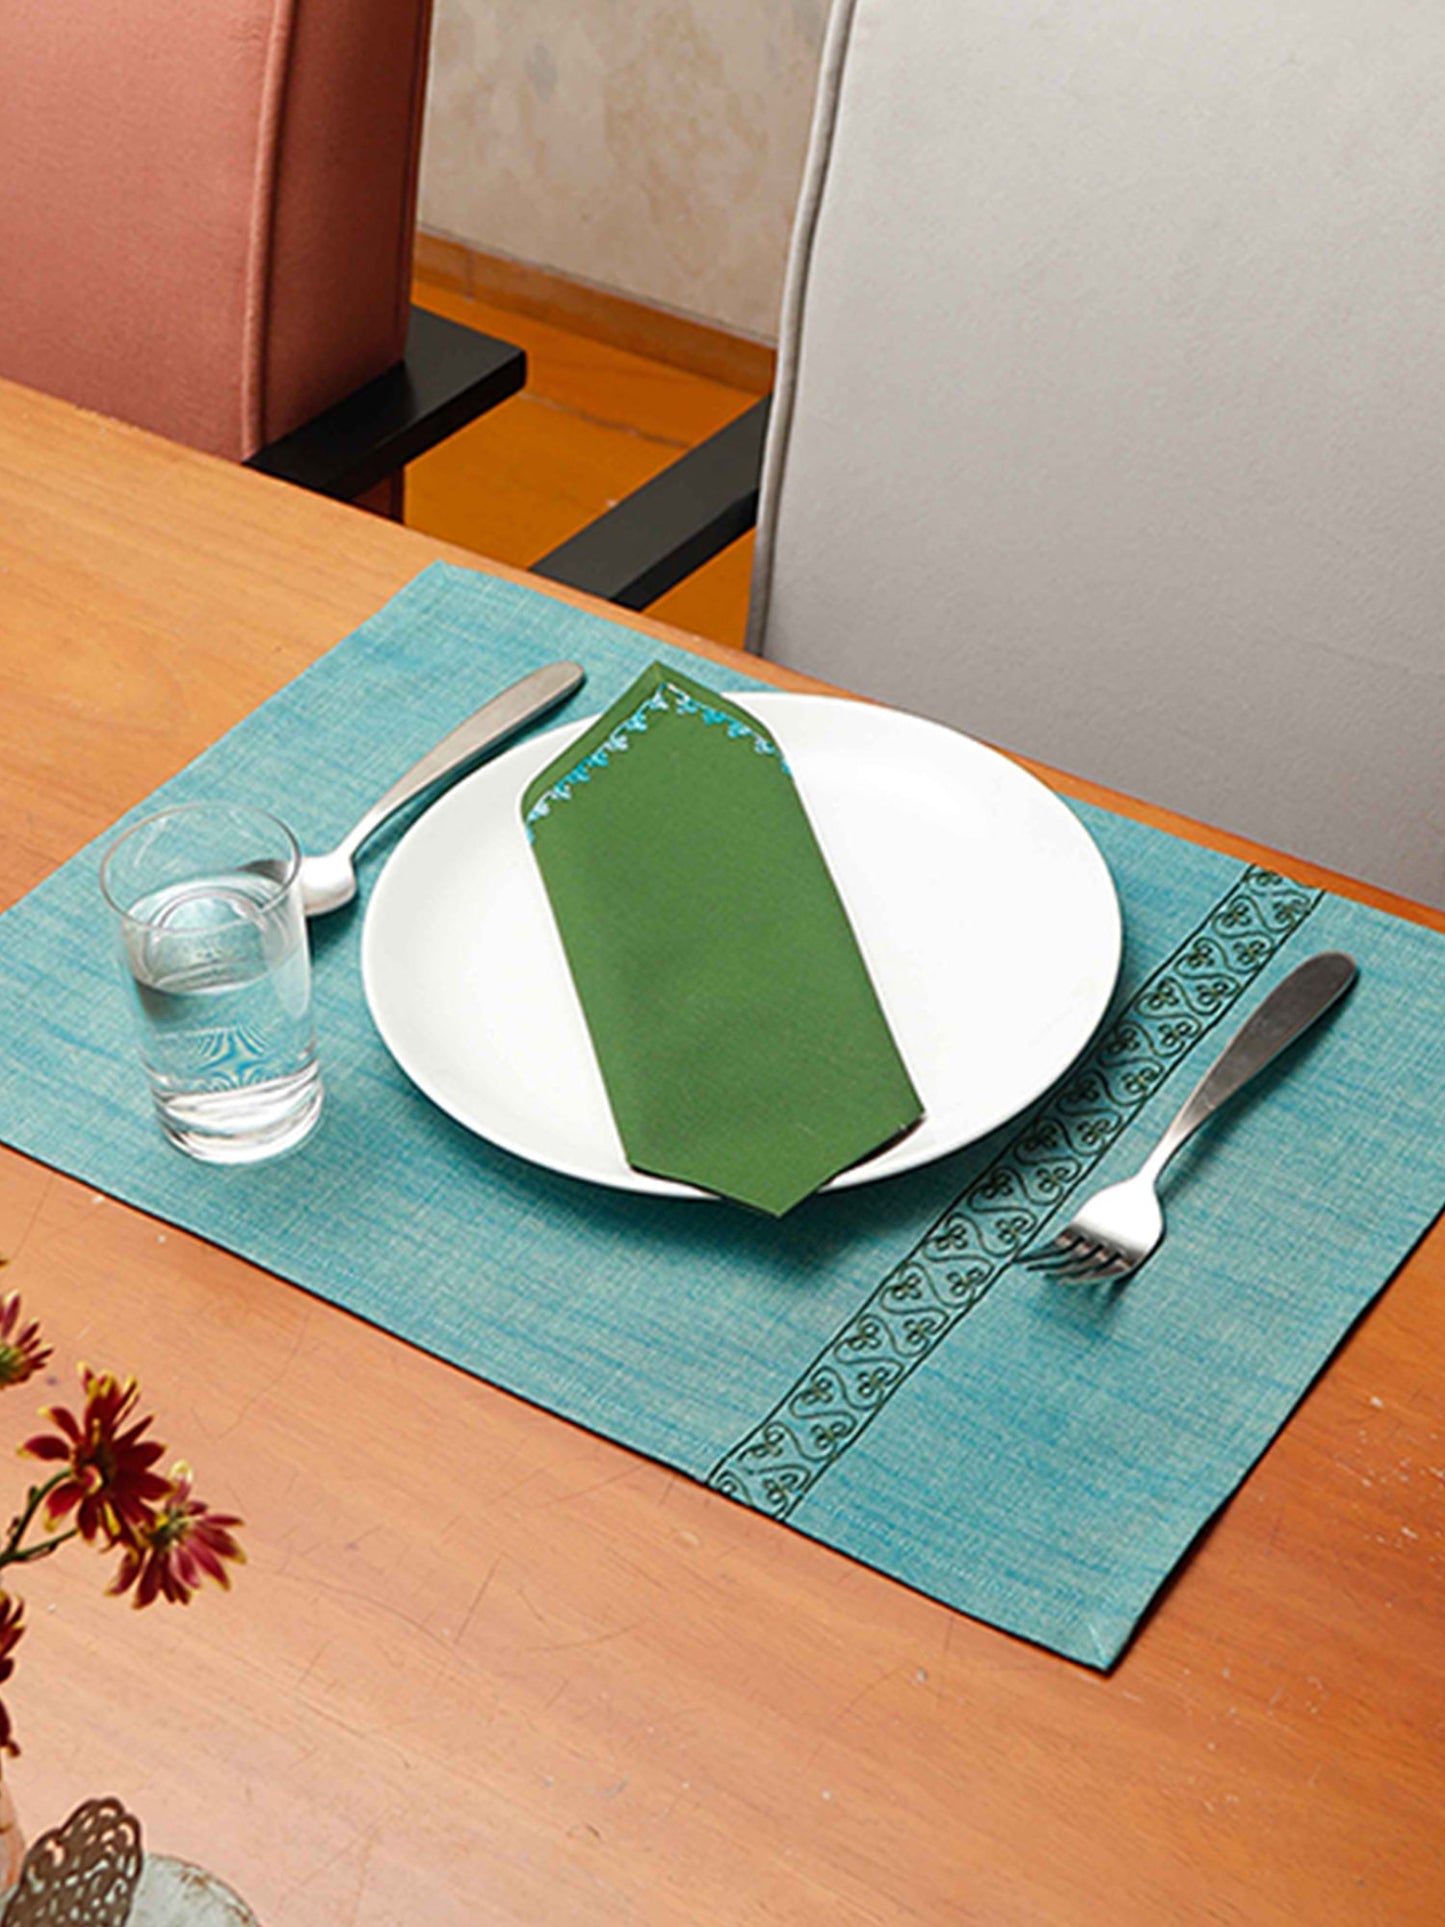 embroidered dinner table mats and napkins in contrast colors - 13x19 inch